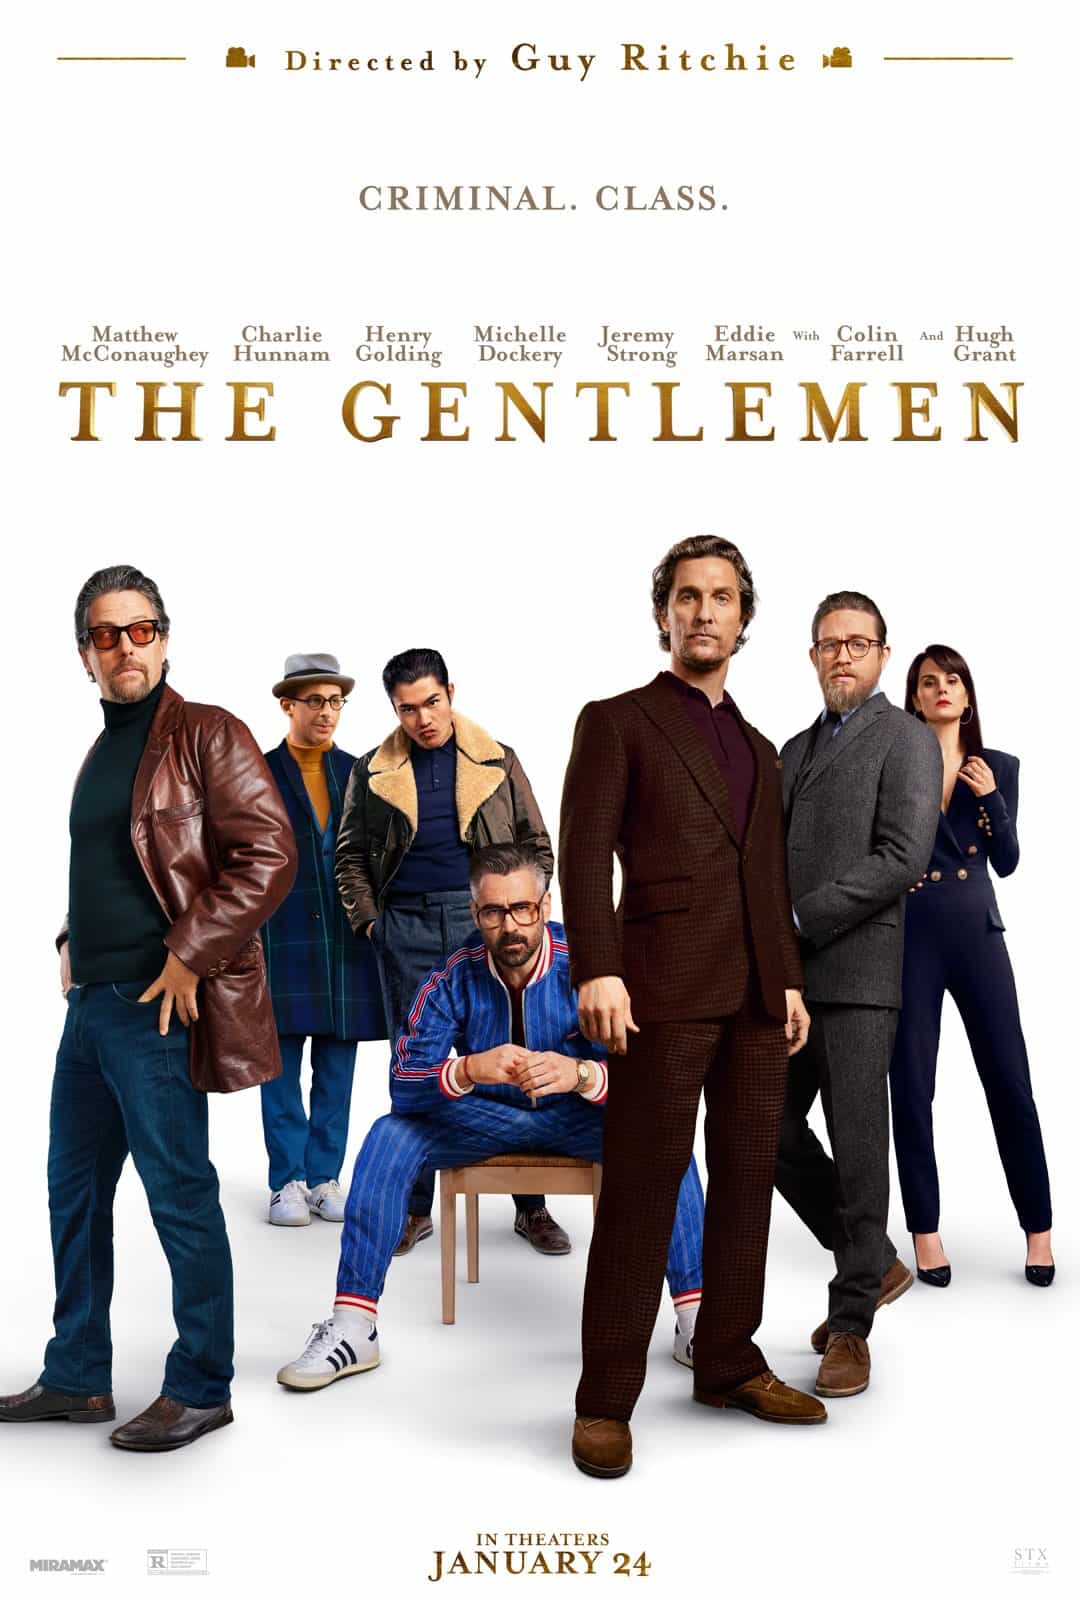 The Gentlemen is given an 18 age rating in the UK for very strong language